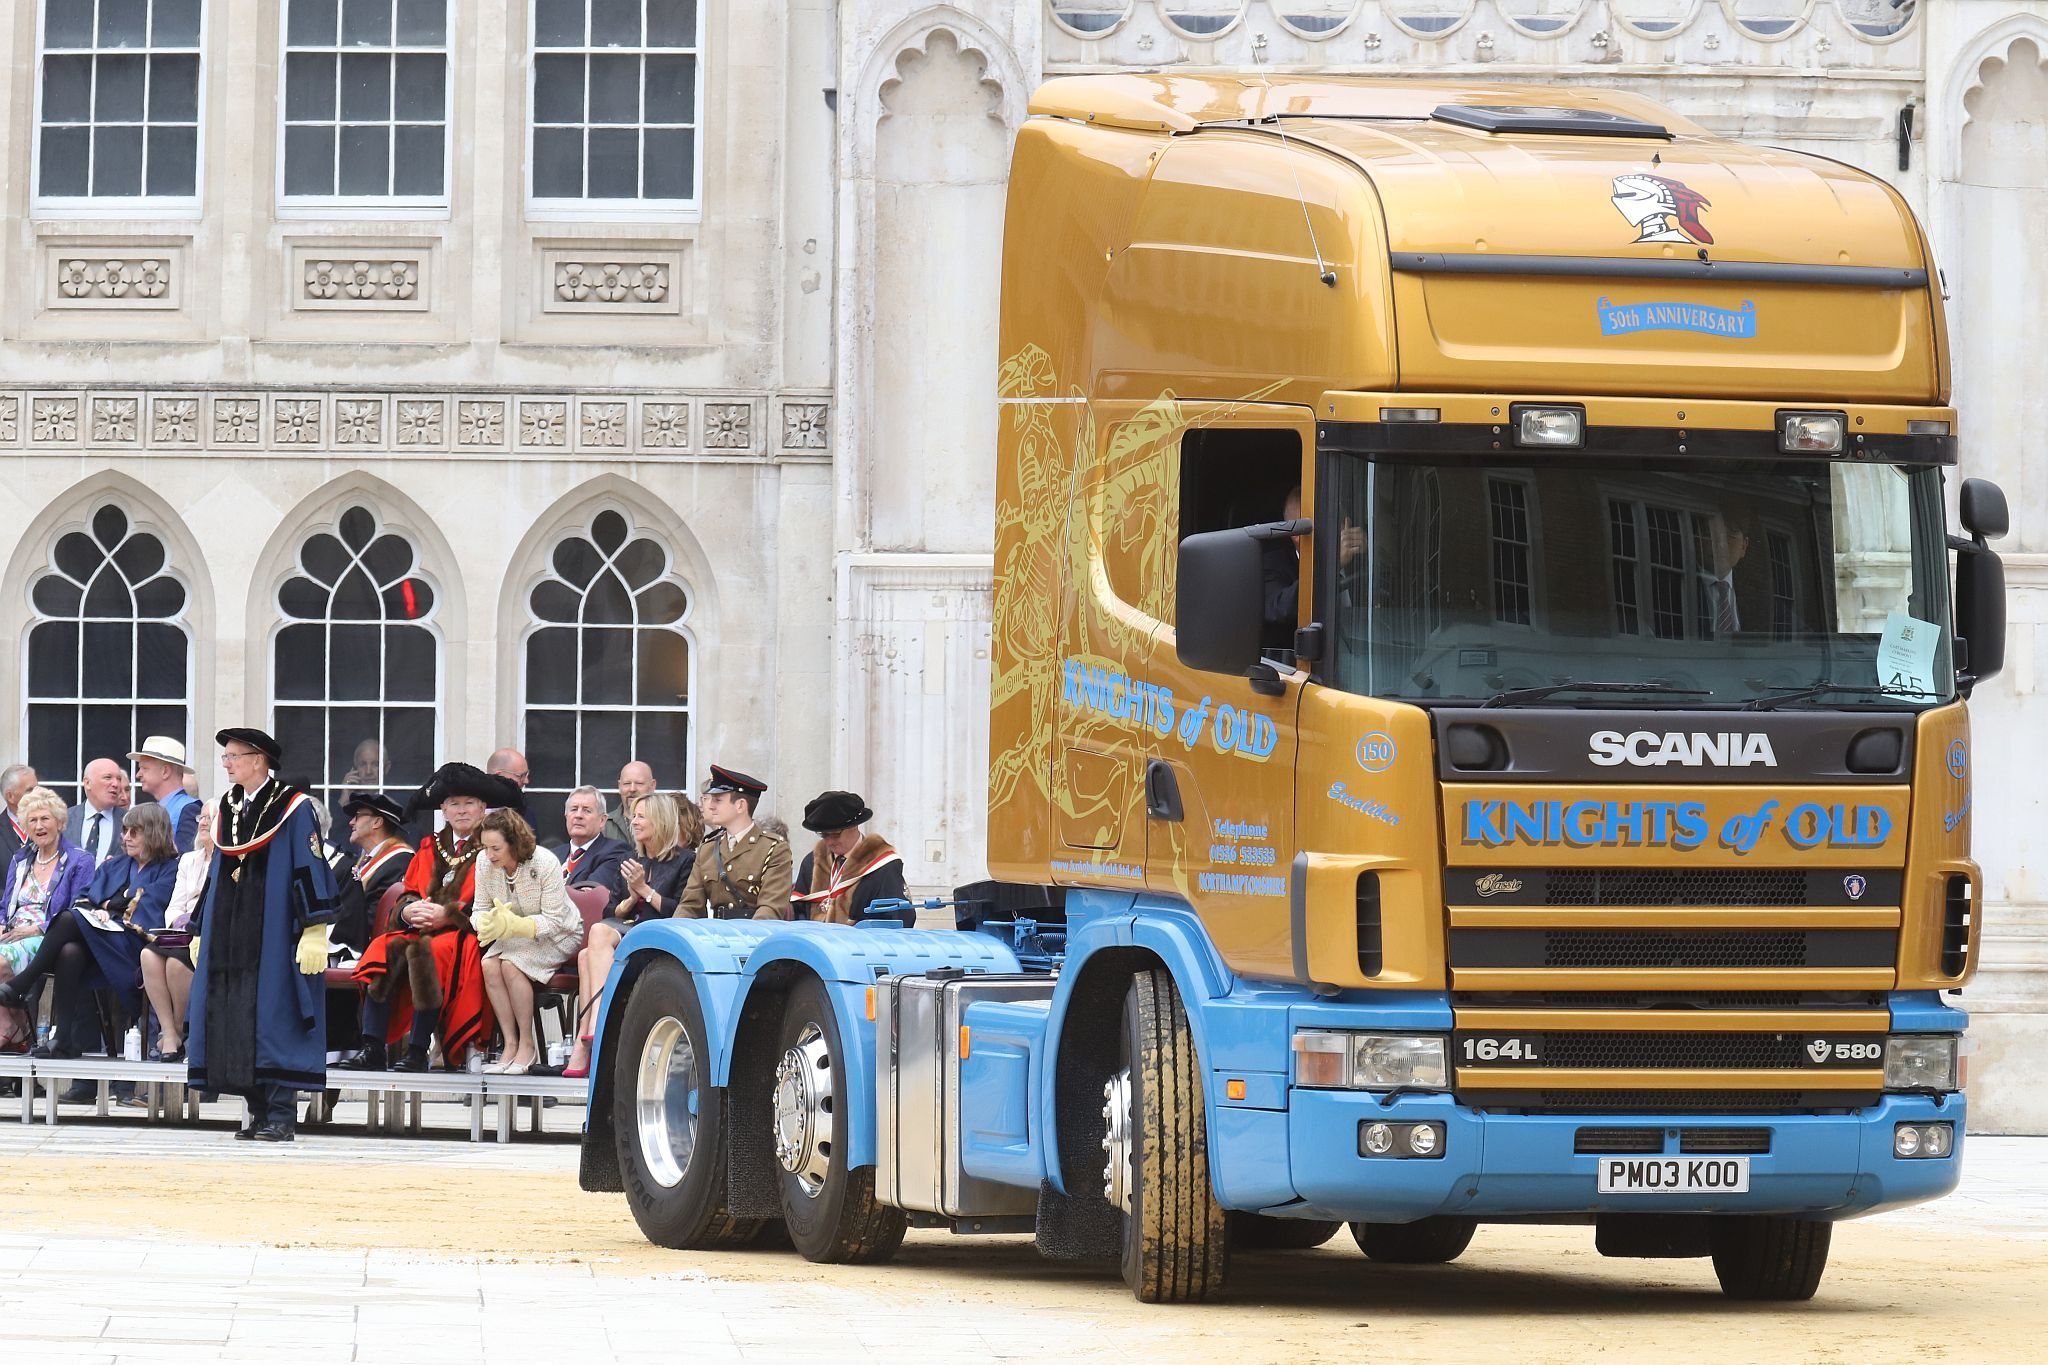 Scania 184L PM03KOO. City of London 2023 Cart Marking in Guildhall Yard on 22-Jul-2023. Hosted by the Worshipful Company of Carmen with the Lord Mayor of the City of London in attendance. Wooden plates on the vehicles are branded with hot irons to allow them to ply for trade in the Square Mile. Another of the City Livery Company's annual ceremonies.